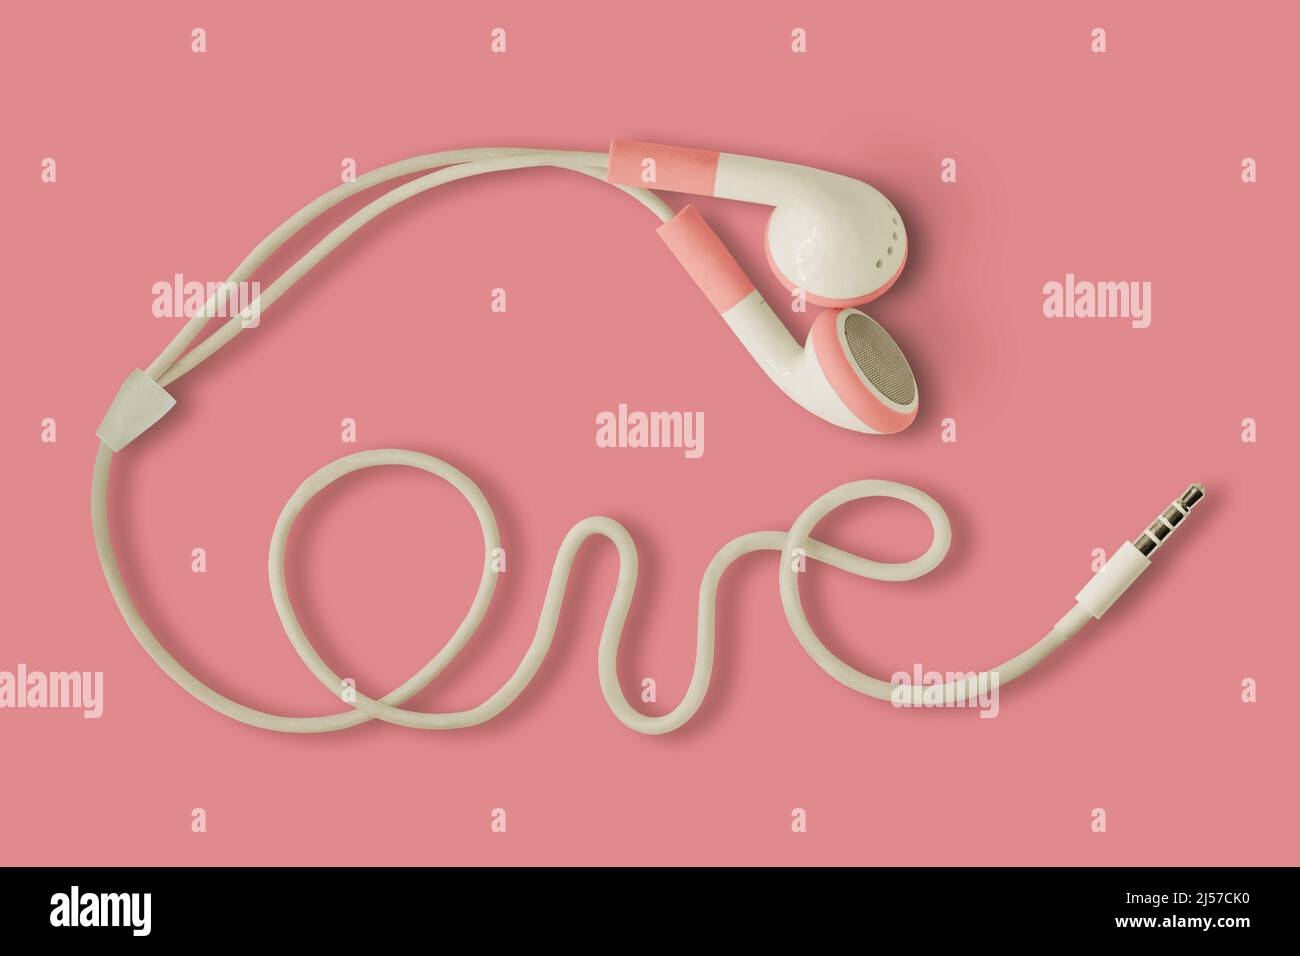 Pink earphones and the word Love written with cable on pink background - Concept of love, listening and support to women Stock Photo